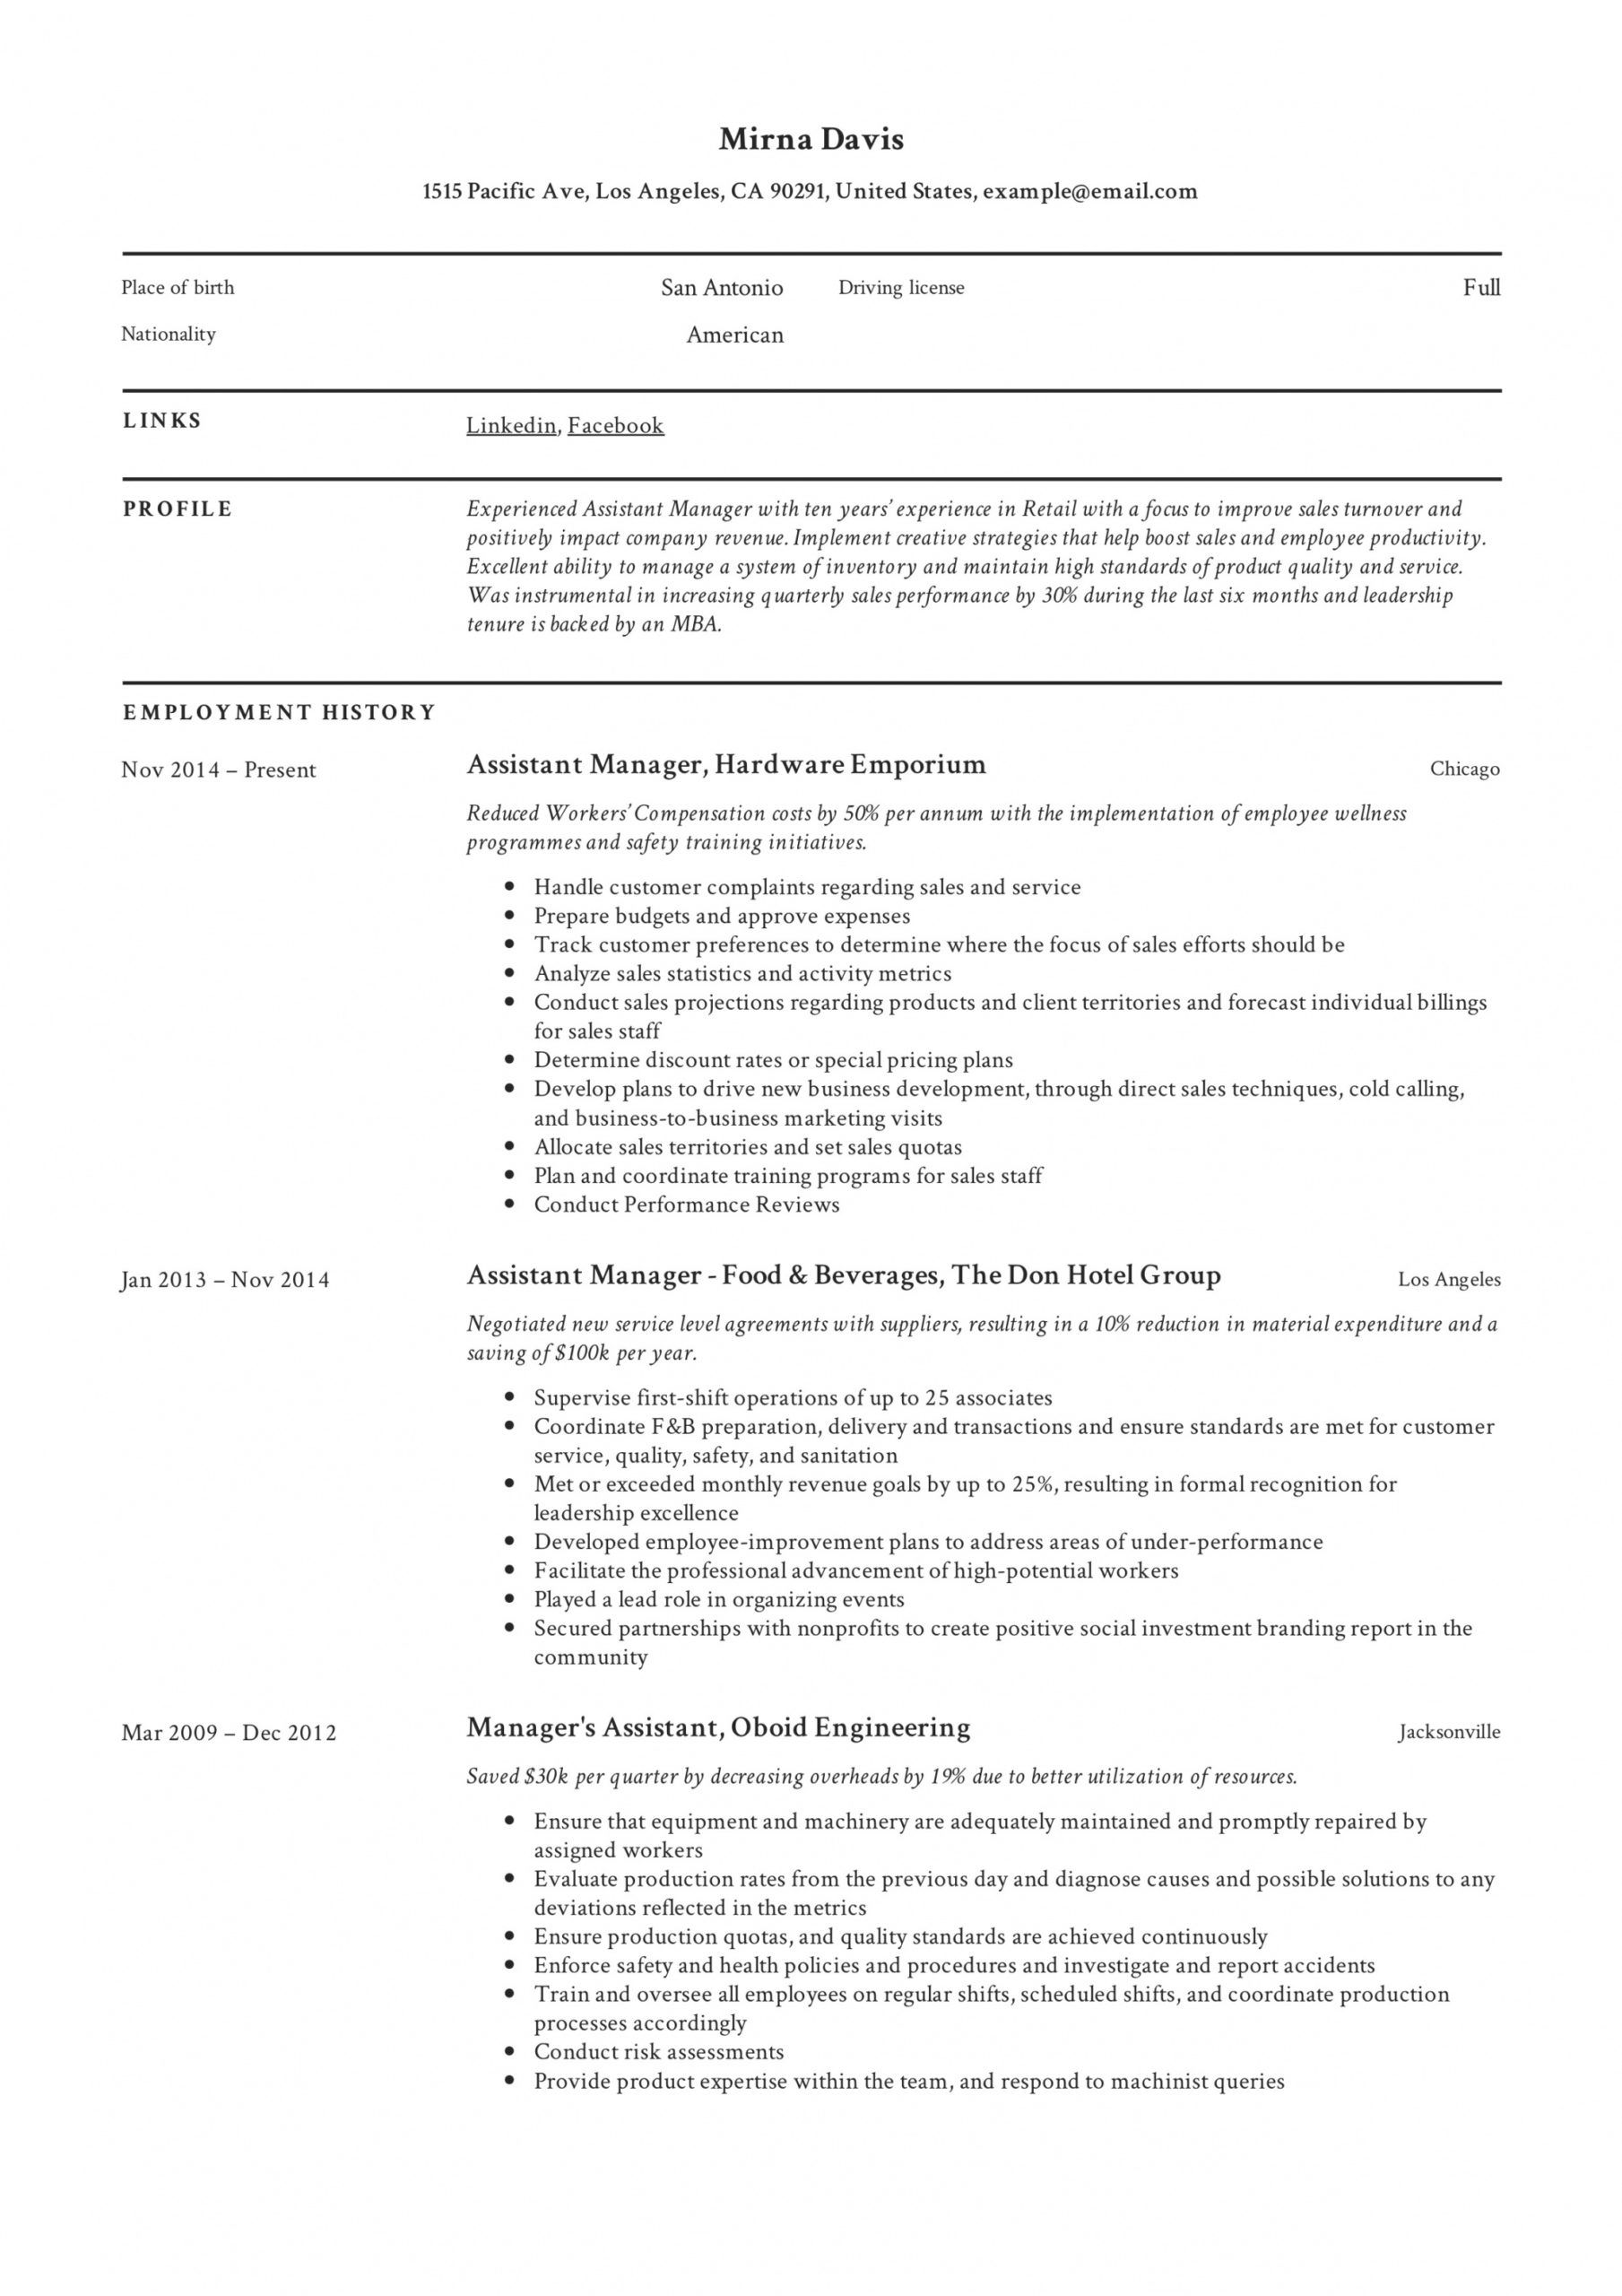 free assistant manager resume &amp; writing guide  12 samples  pdf assistant manager job description template pdf